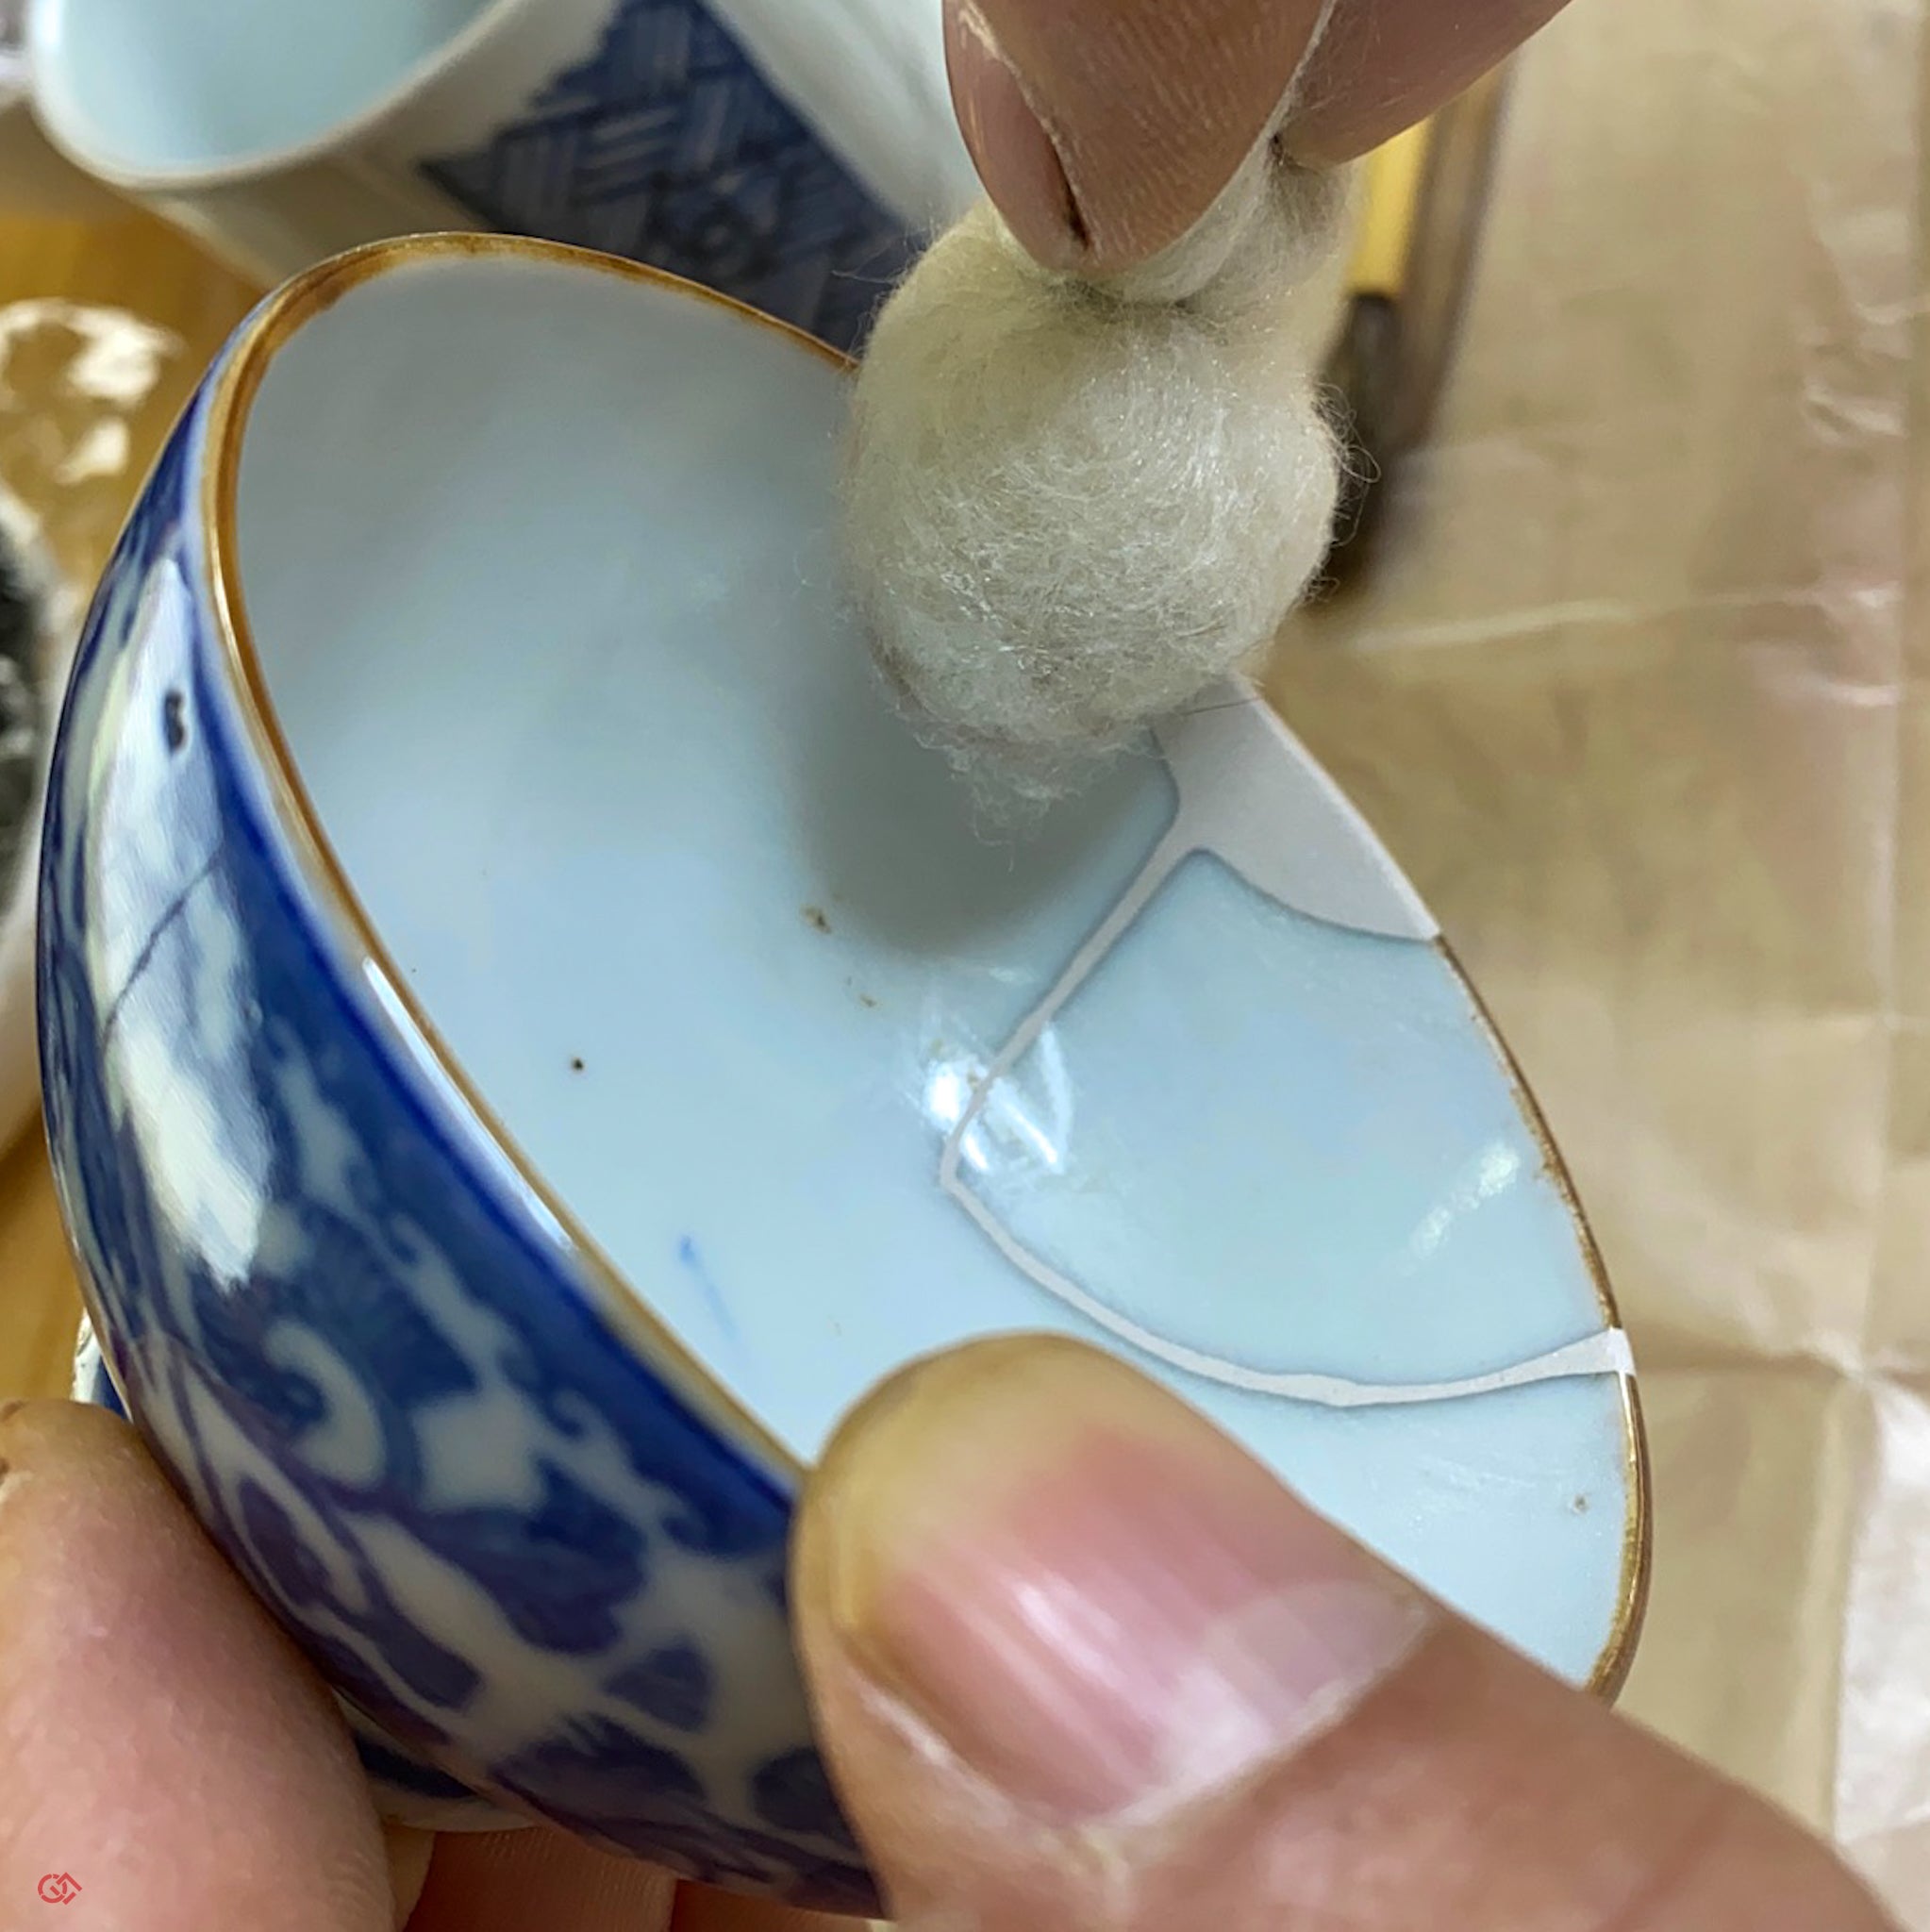 Traditional Kintsugi repair with pure silver